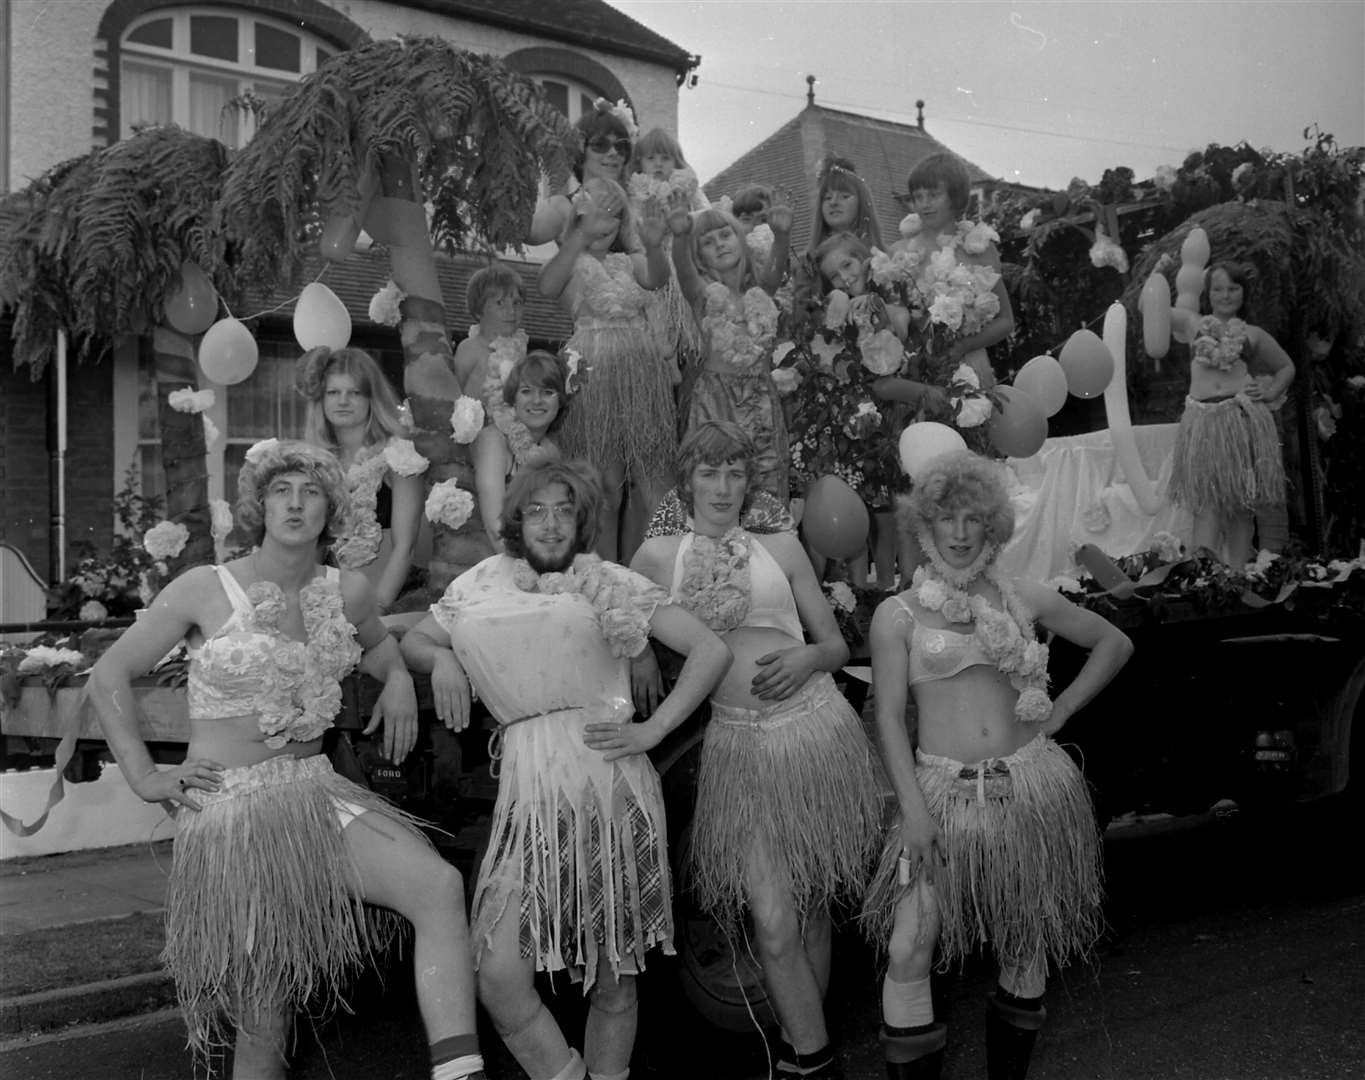 One of the floats at Herne Bay Carnival in August 1977